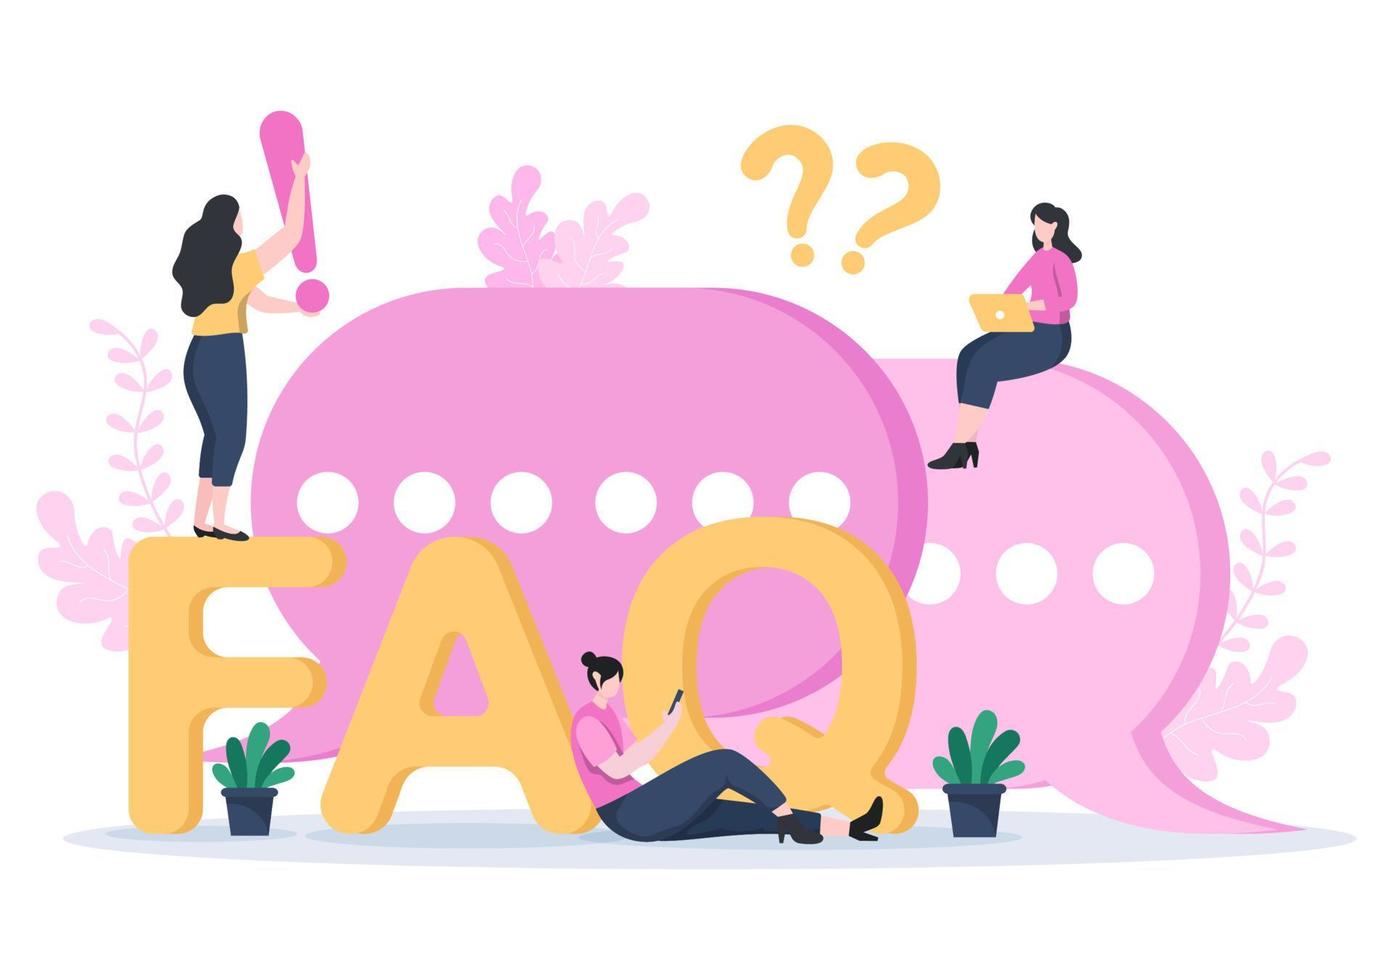 FAQ or Frequently Asked Questions for Website, Blogger Helpdesk, Clients Assistance, Helpful Information, Guides. Background Vector Illustration